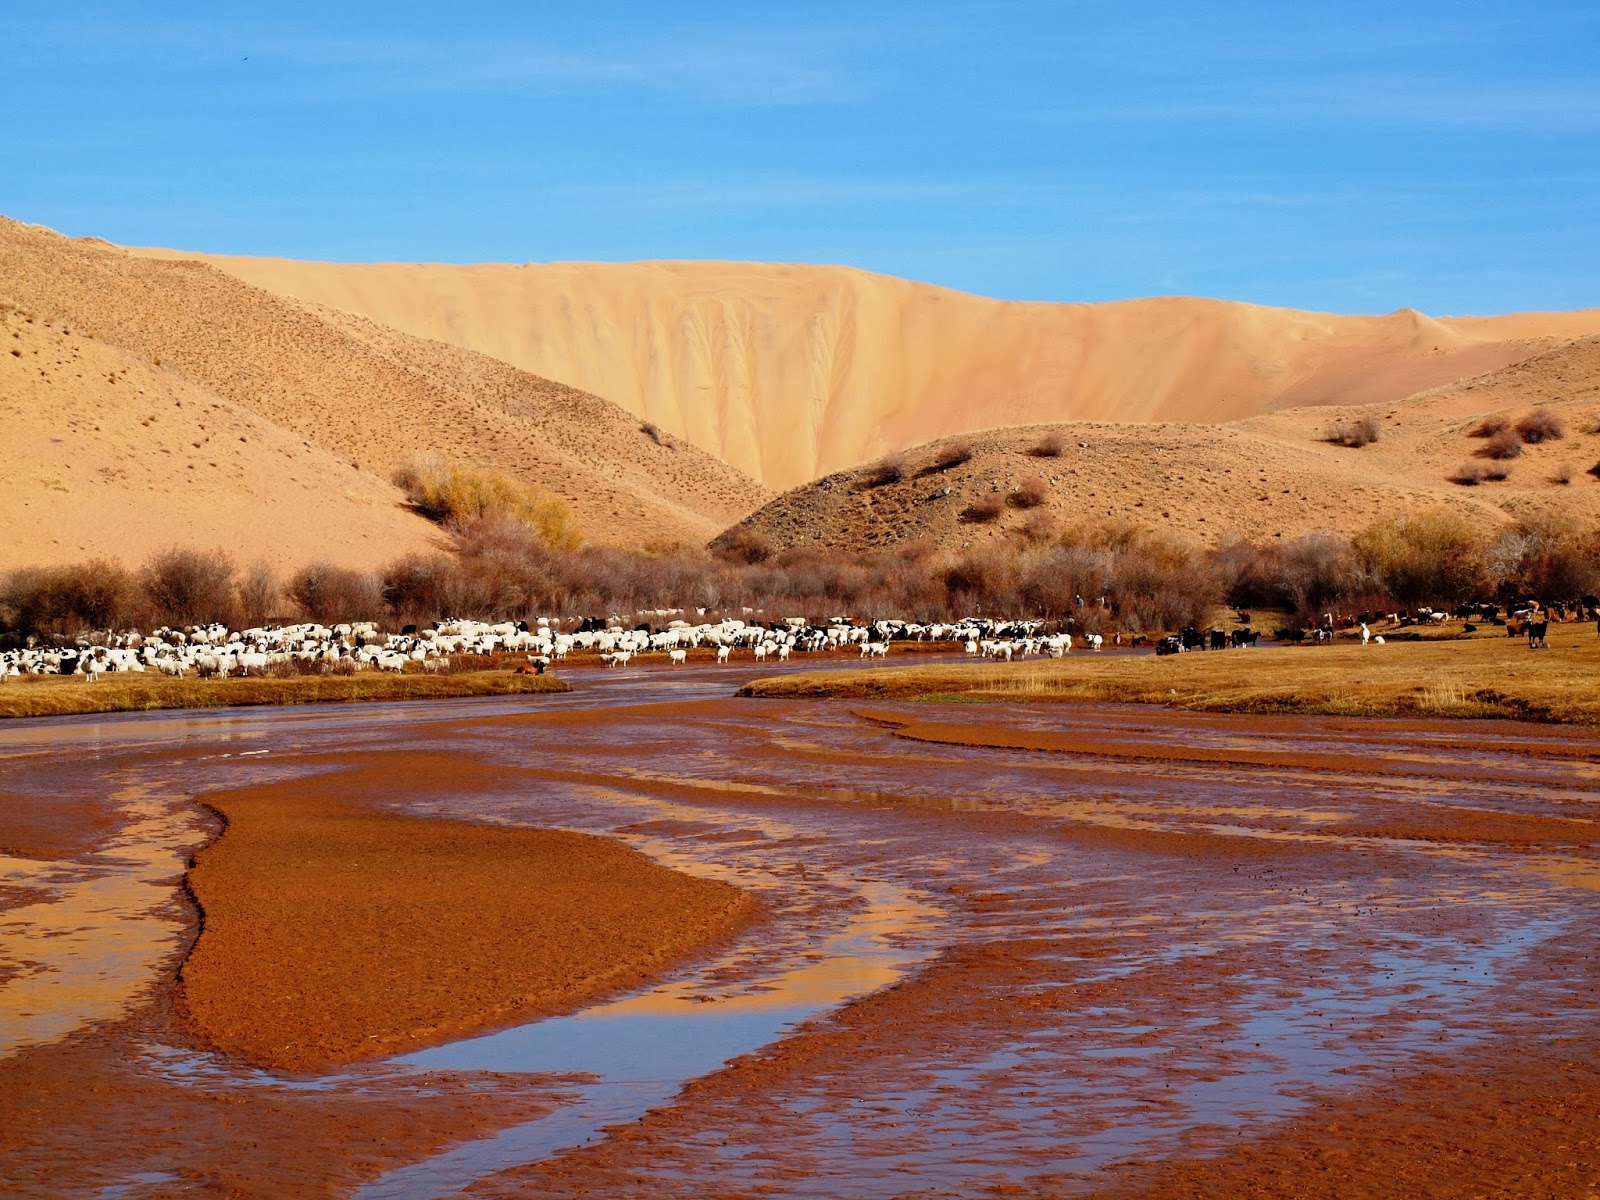 Reasons to visit Mongolia - the spectacular (and surprising) Mukhartiin Gol the